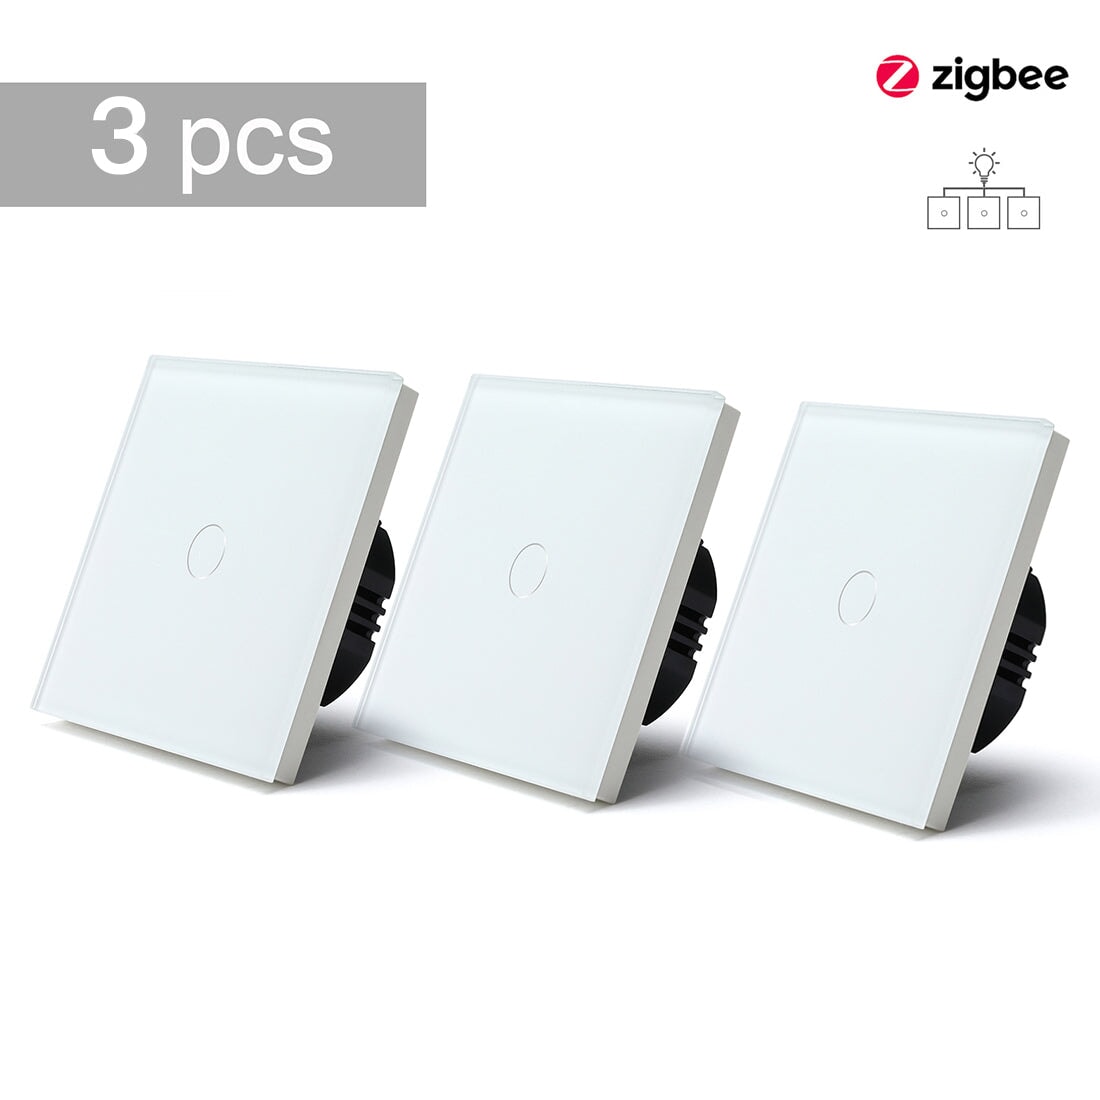 BSEED Zigbee Single Live Line Switch 1/2/3 Gang 1/2/3 Way Wall Smart Light Switch Single Live Line 1/2/3 pack Light Switches Bseedswitch White 1Gang 3 Pcs/Pack